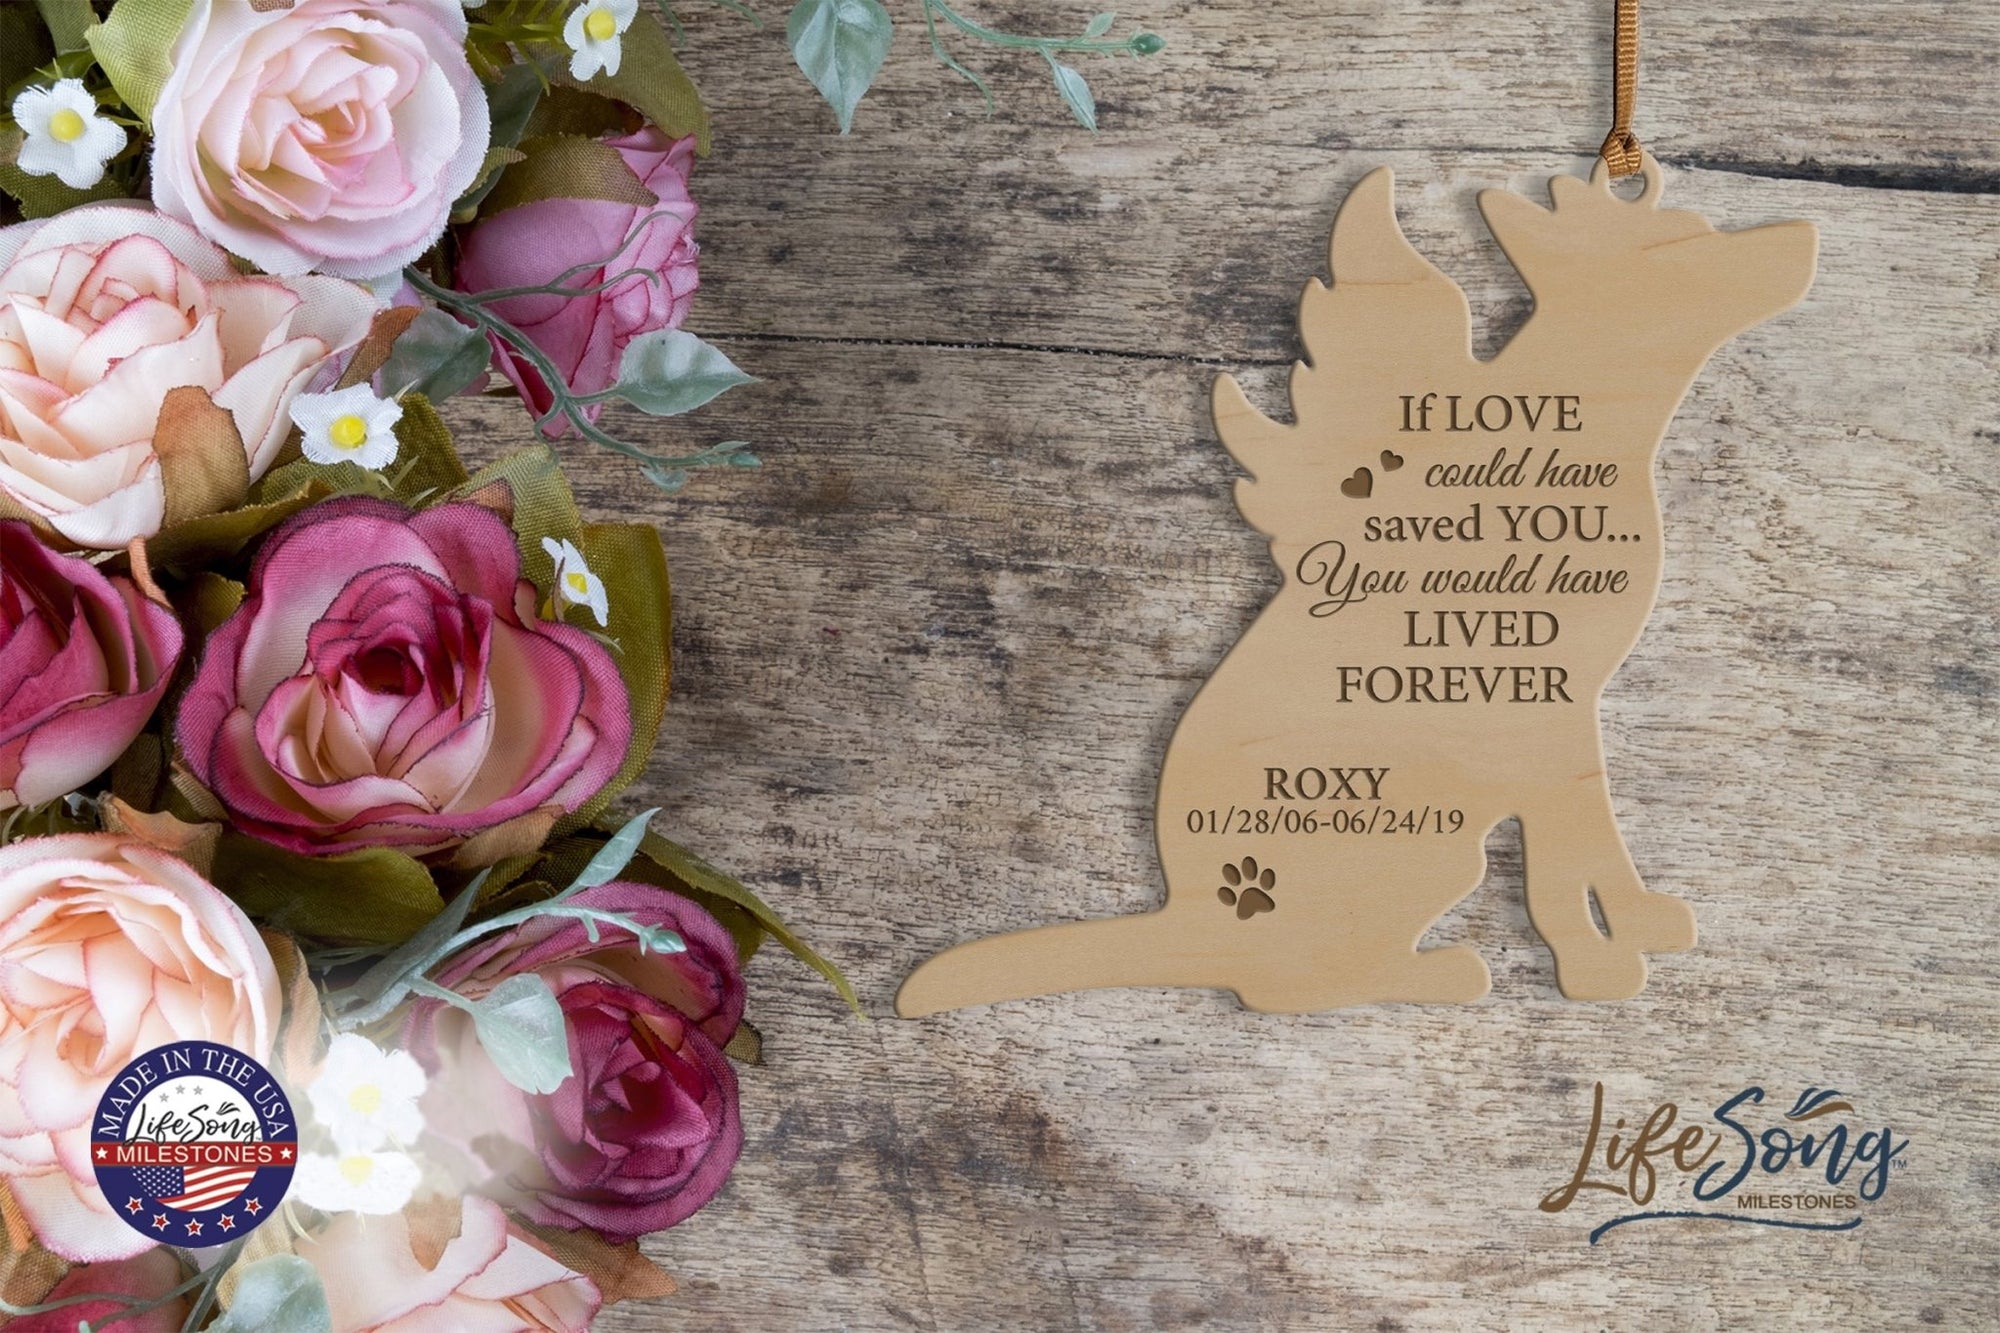 Personalized Engraved Memorial Dog Ornament 4.9375” x 5.375” x 0.125” - If love could have saved you (SCRIPT) - LifeSong Milestones